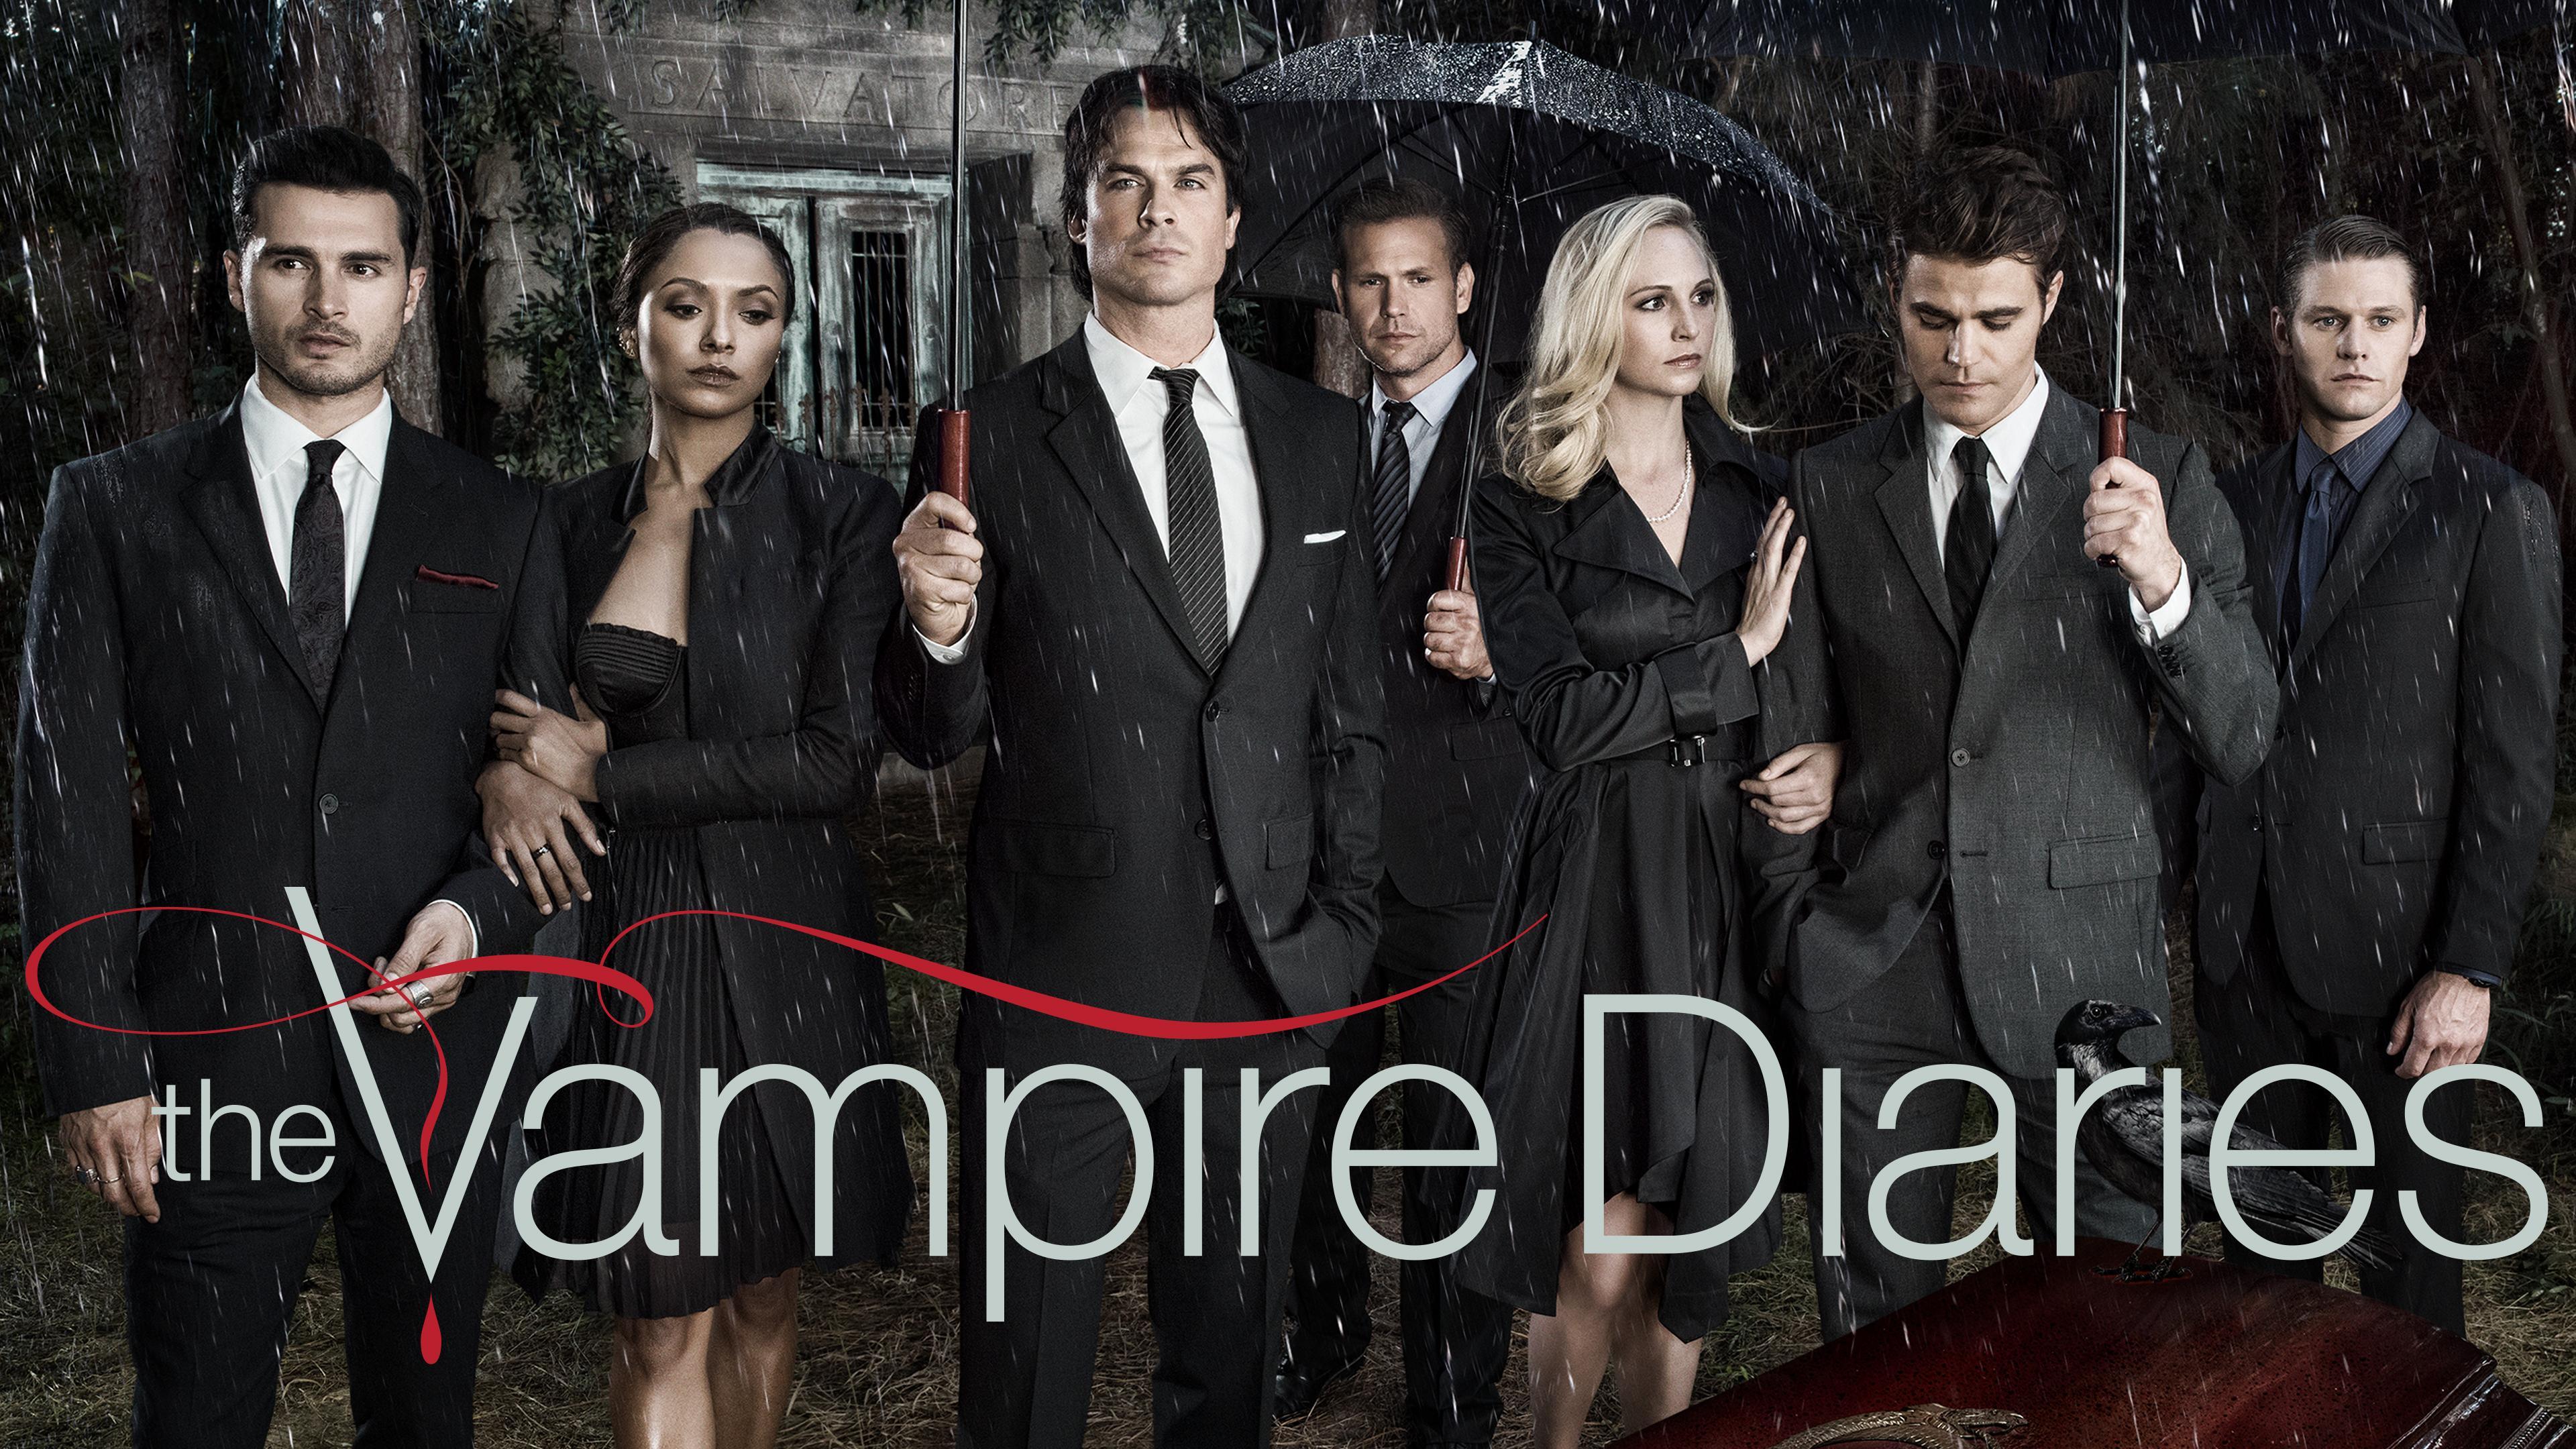 The Vampire Diaries S2.E07 “Masquerade” - Forever Young Adult